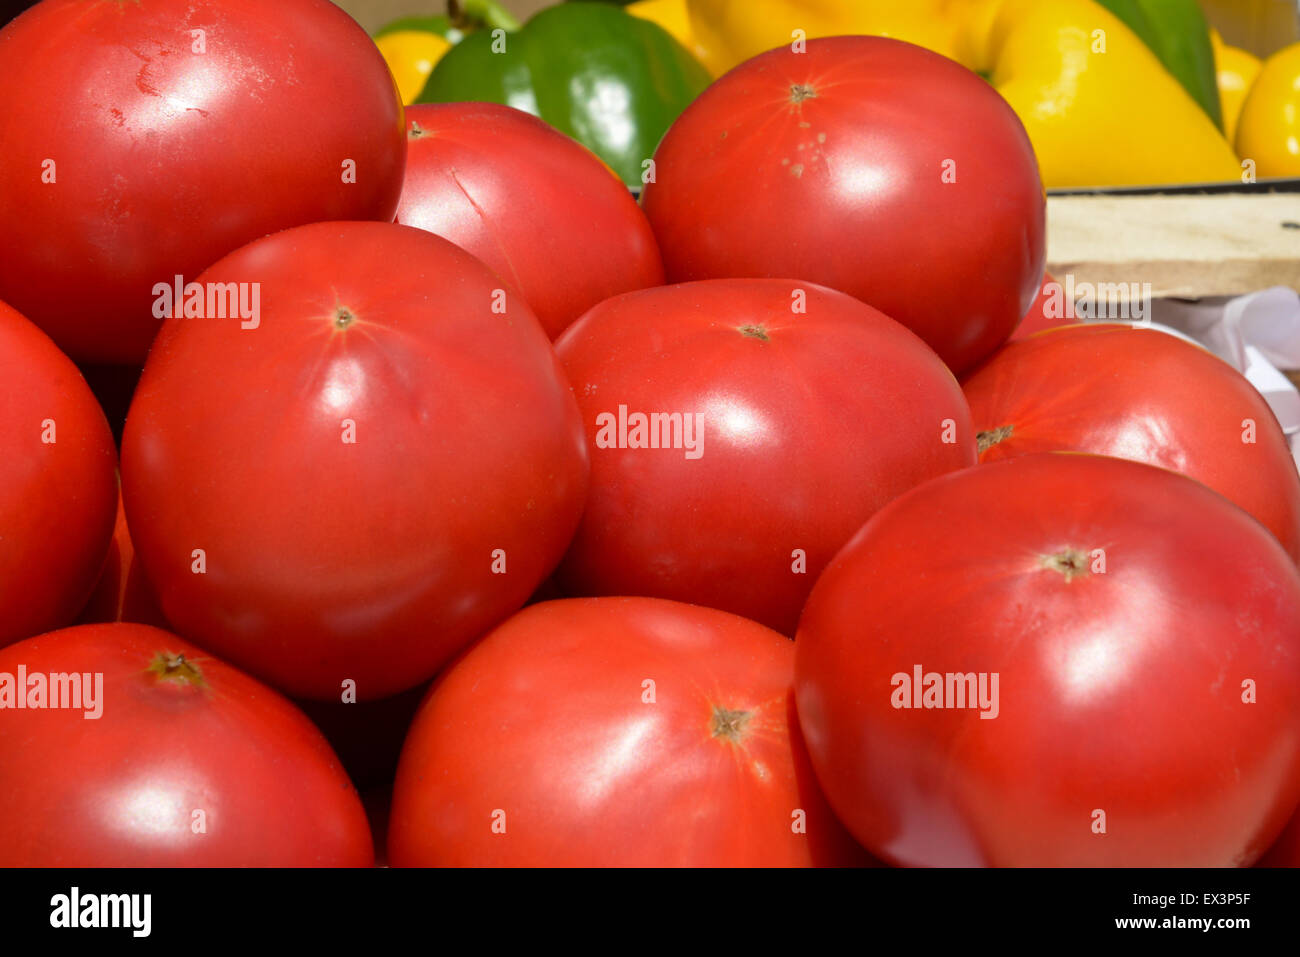 lot of ripe tomatoes in wooden crates close up Stock Photo